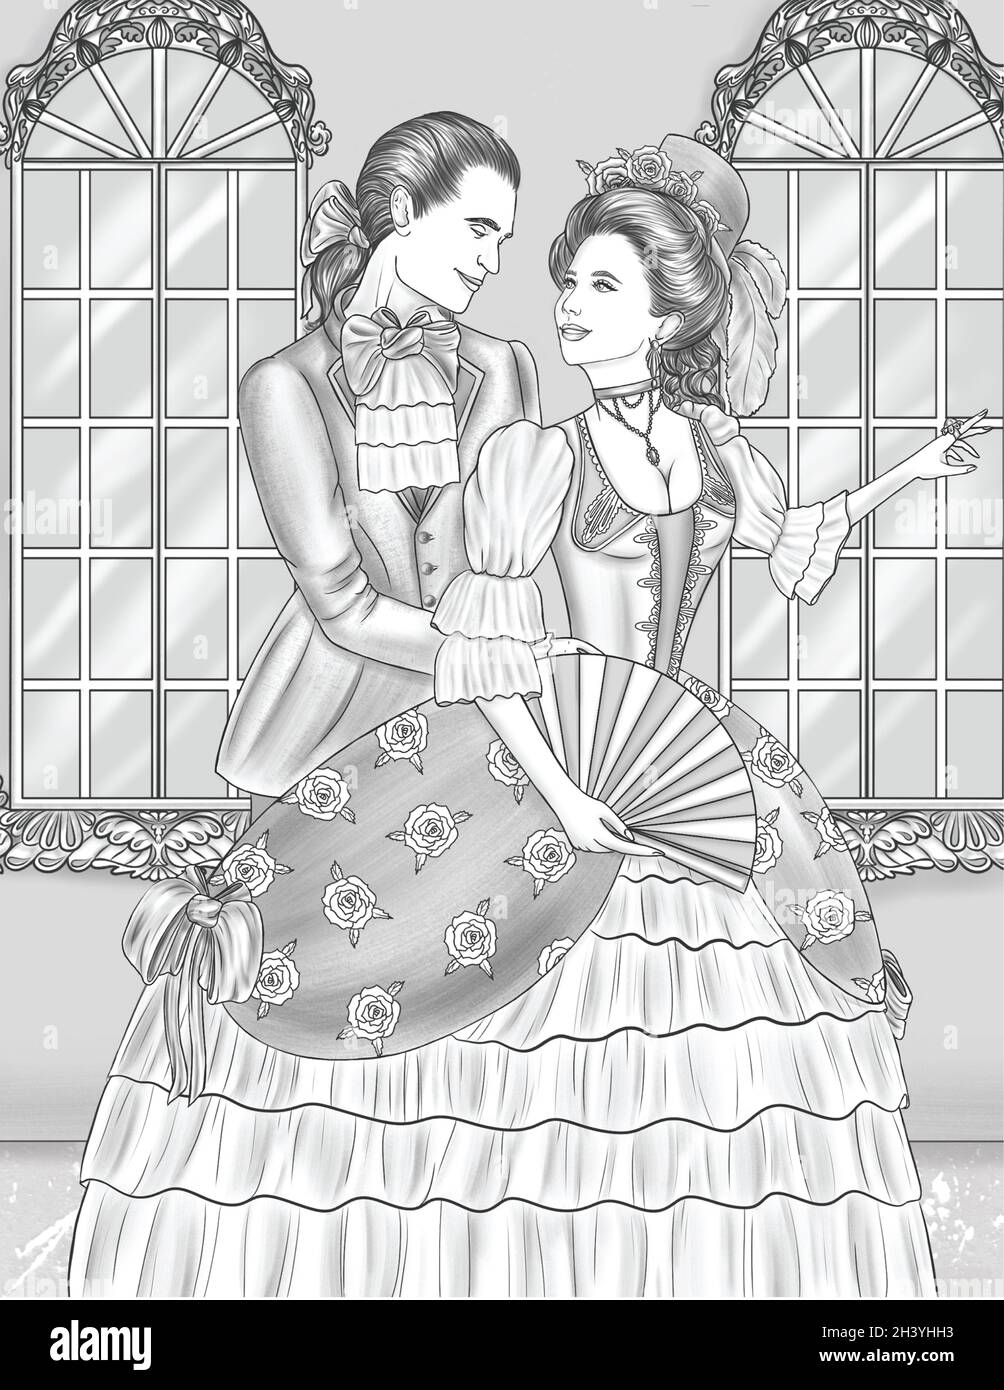 Man And Woman In Vintage Attire Standing Looking At Each Other With Windows Colorless Line Drawing. Lady In Dress Holding Fan Lo Stock Photo